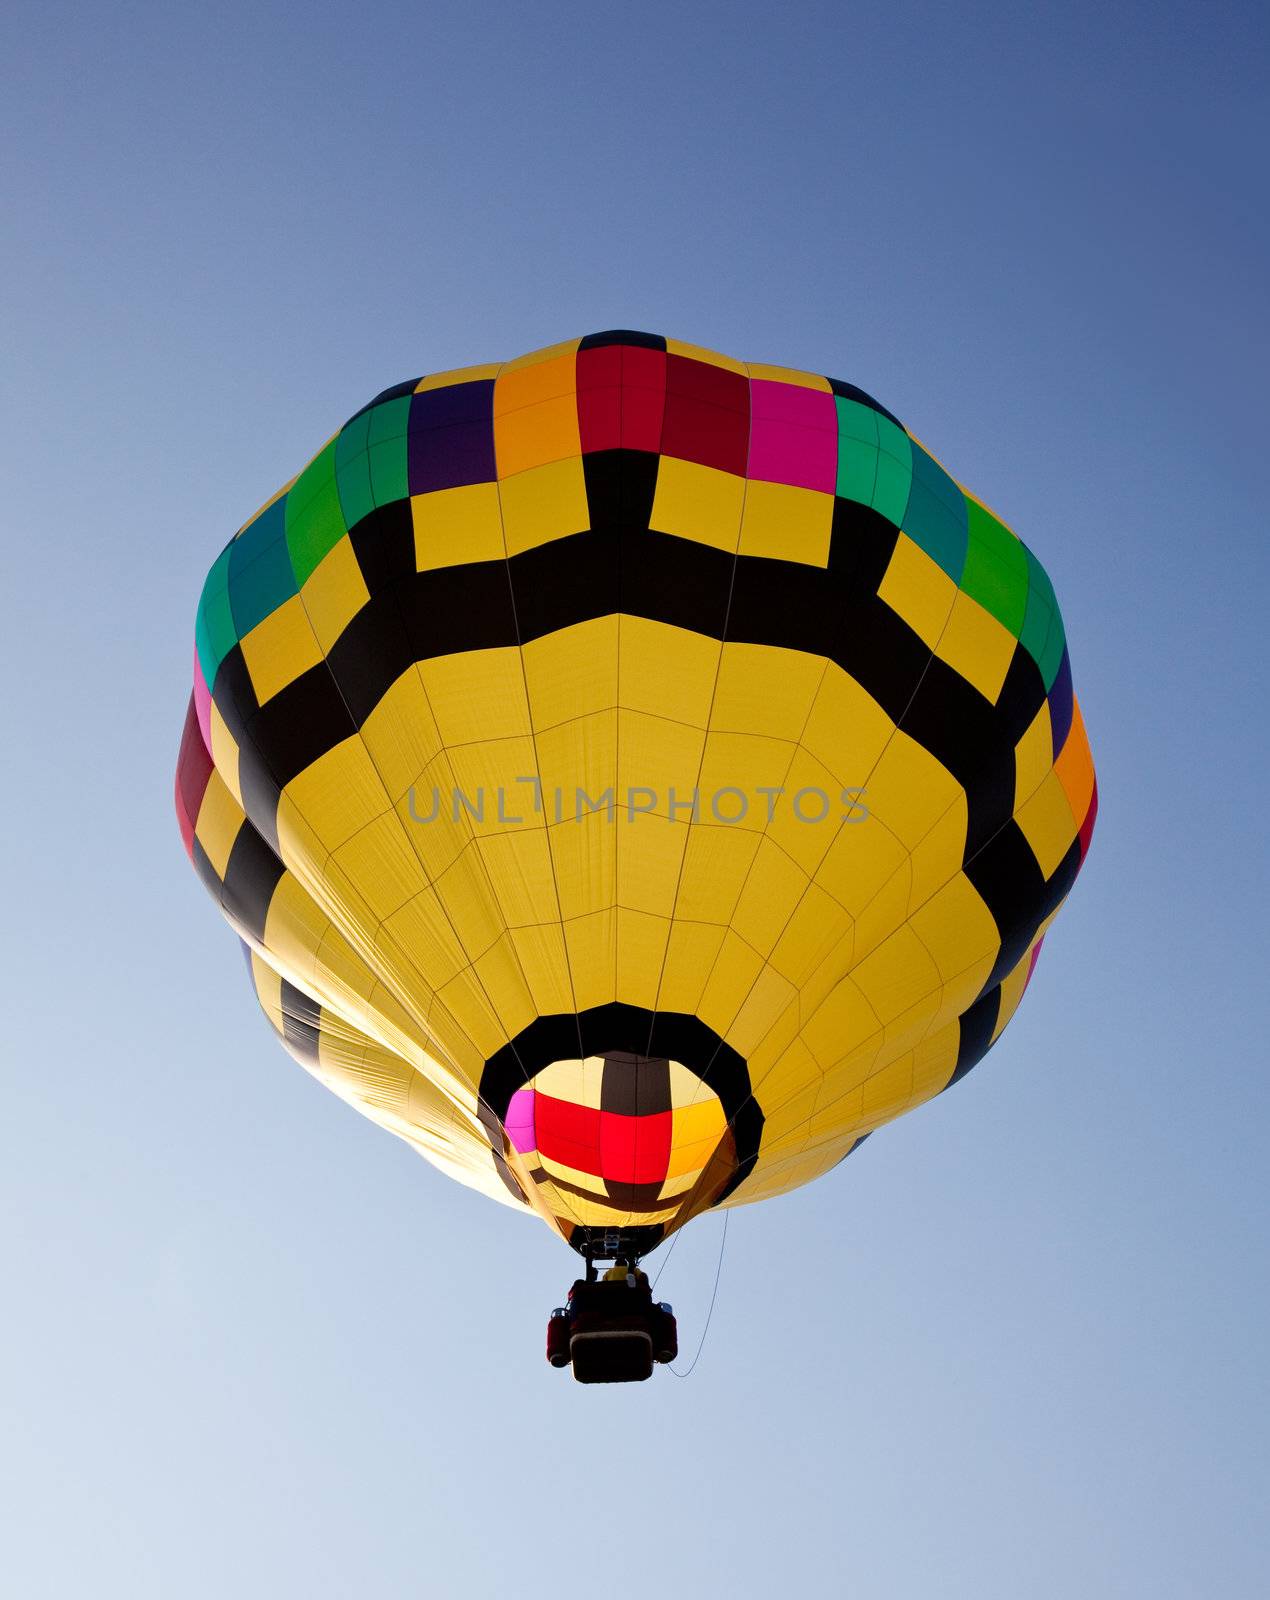 Hot air balloon soaring into the sky by steheap